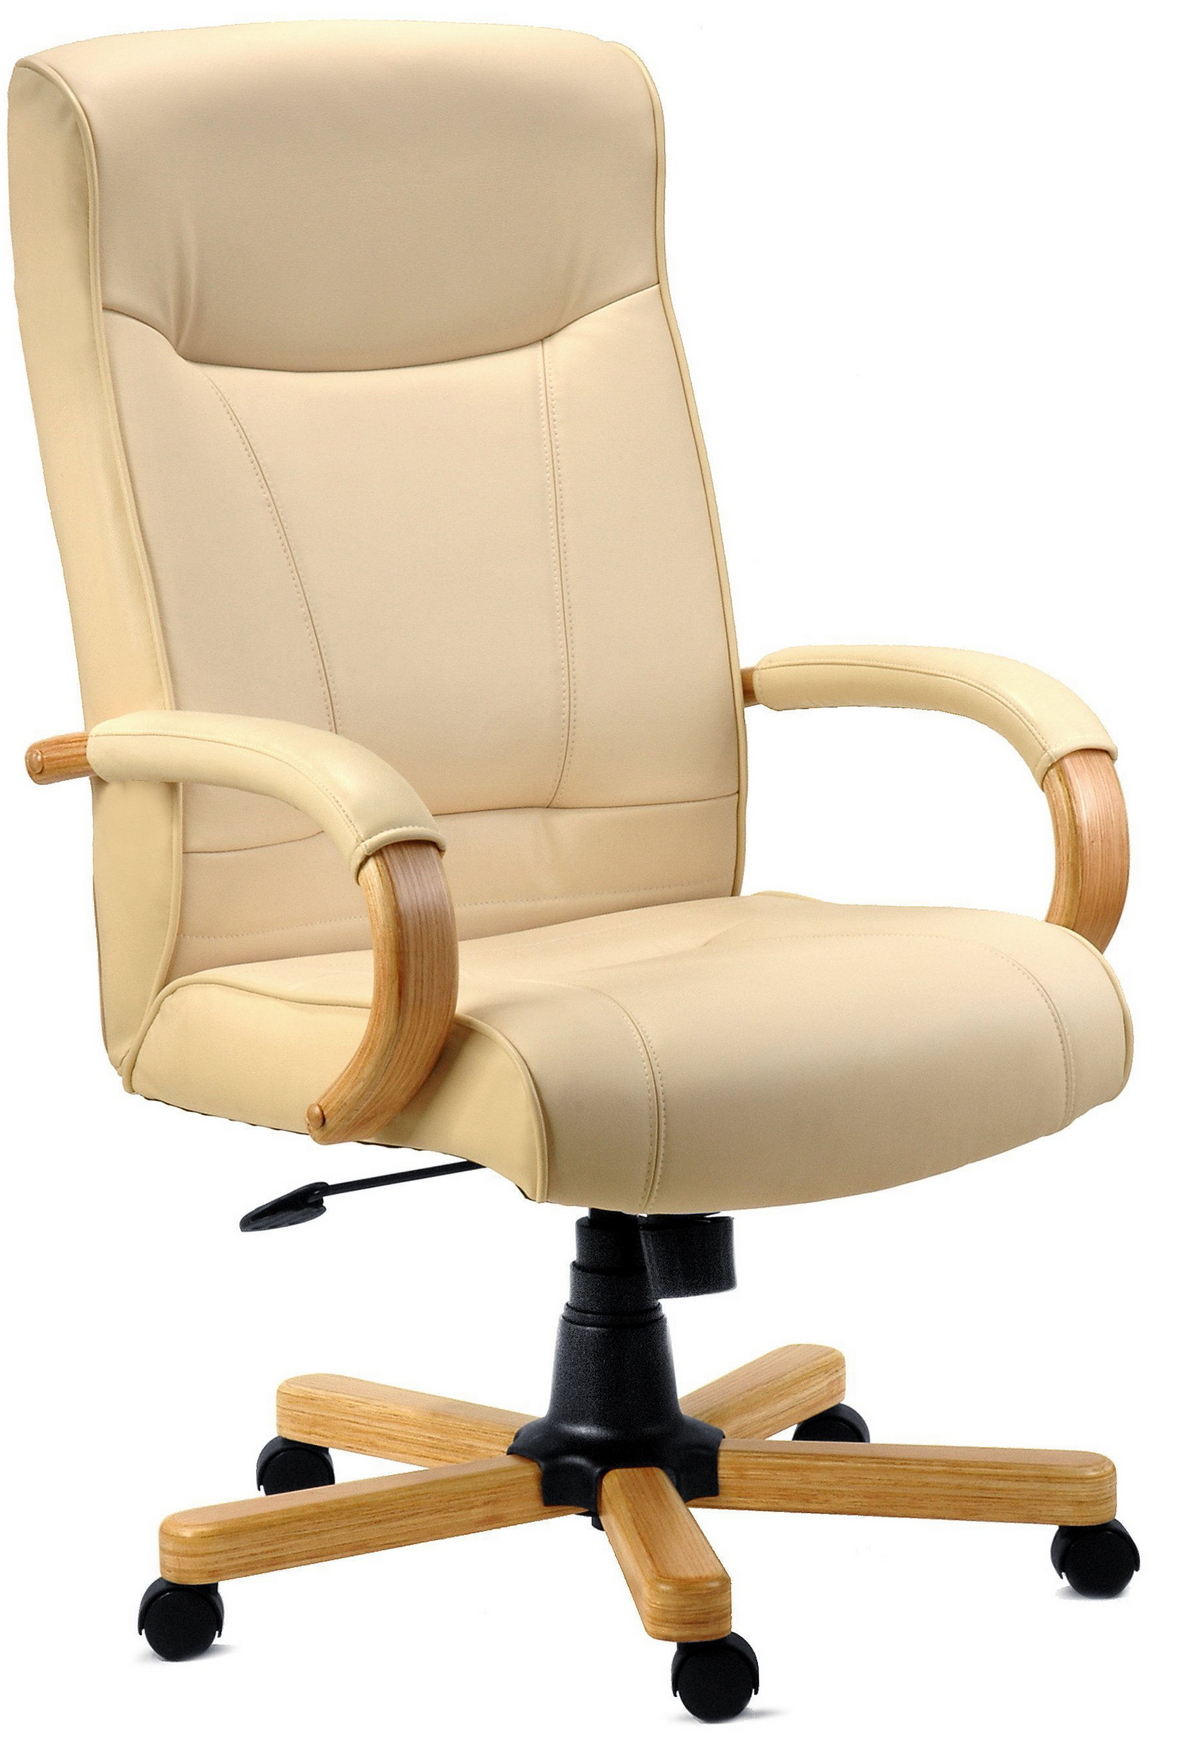 Kango Executive Leather Office Chair, Leather Executive Office Chairs Uk